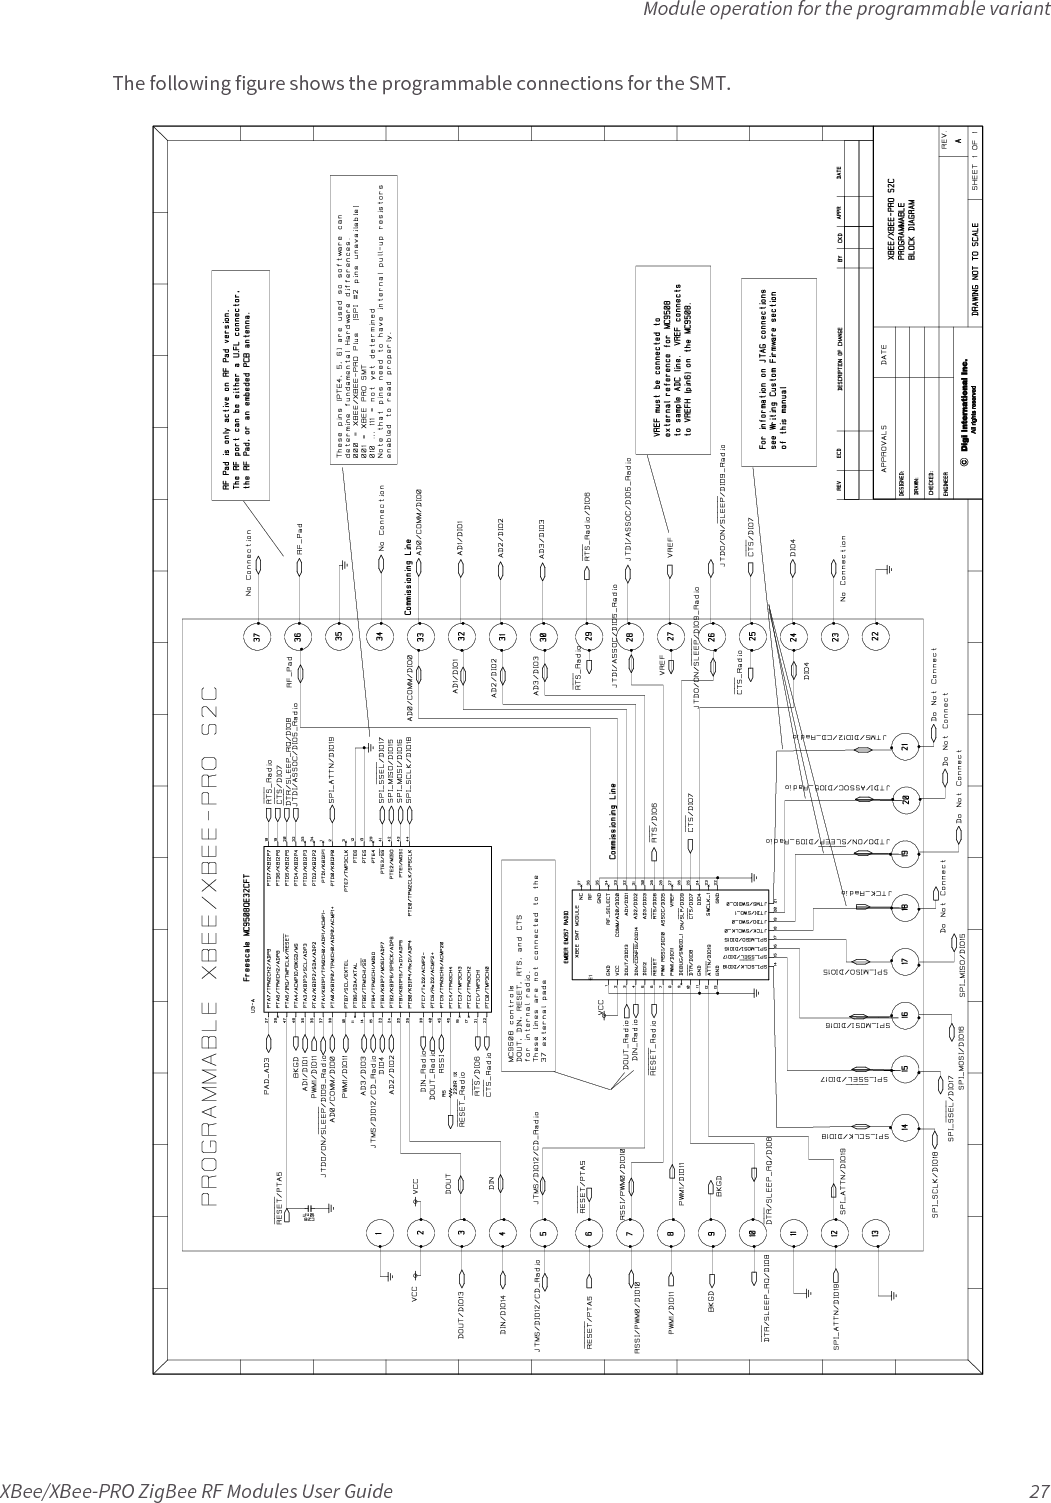 Module operation for the programmable variantXBee/XBee-PRO ZigBee RF Modules User Guide 27The following figure shows the programmable connections for the SMT.